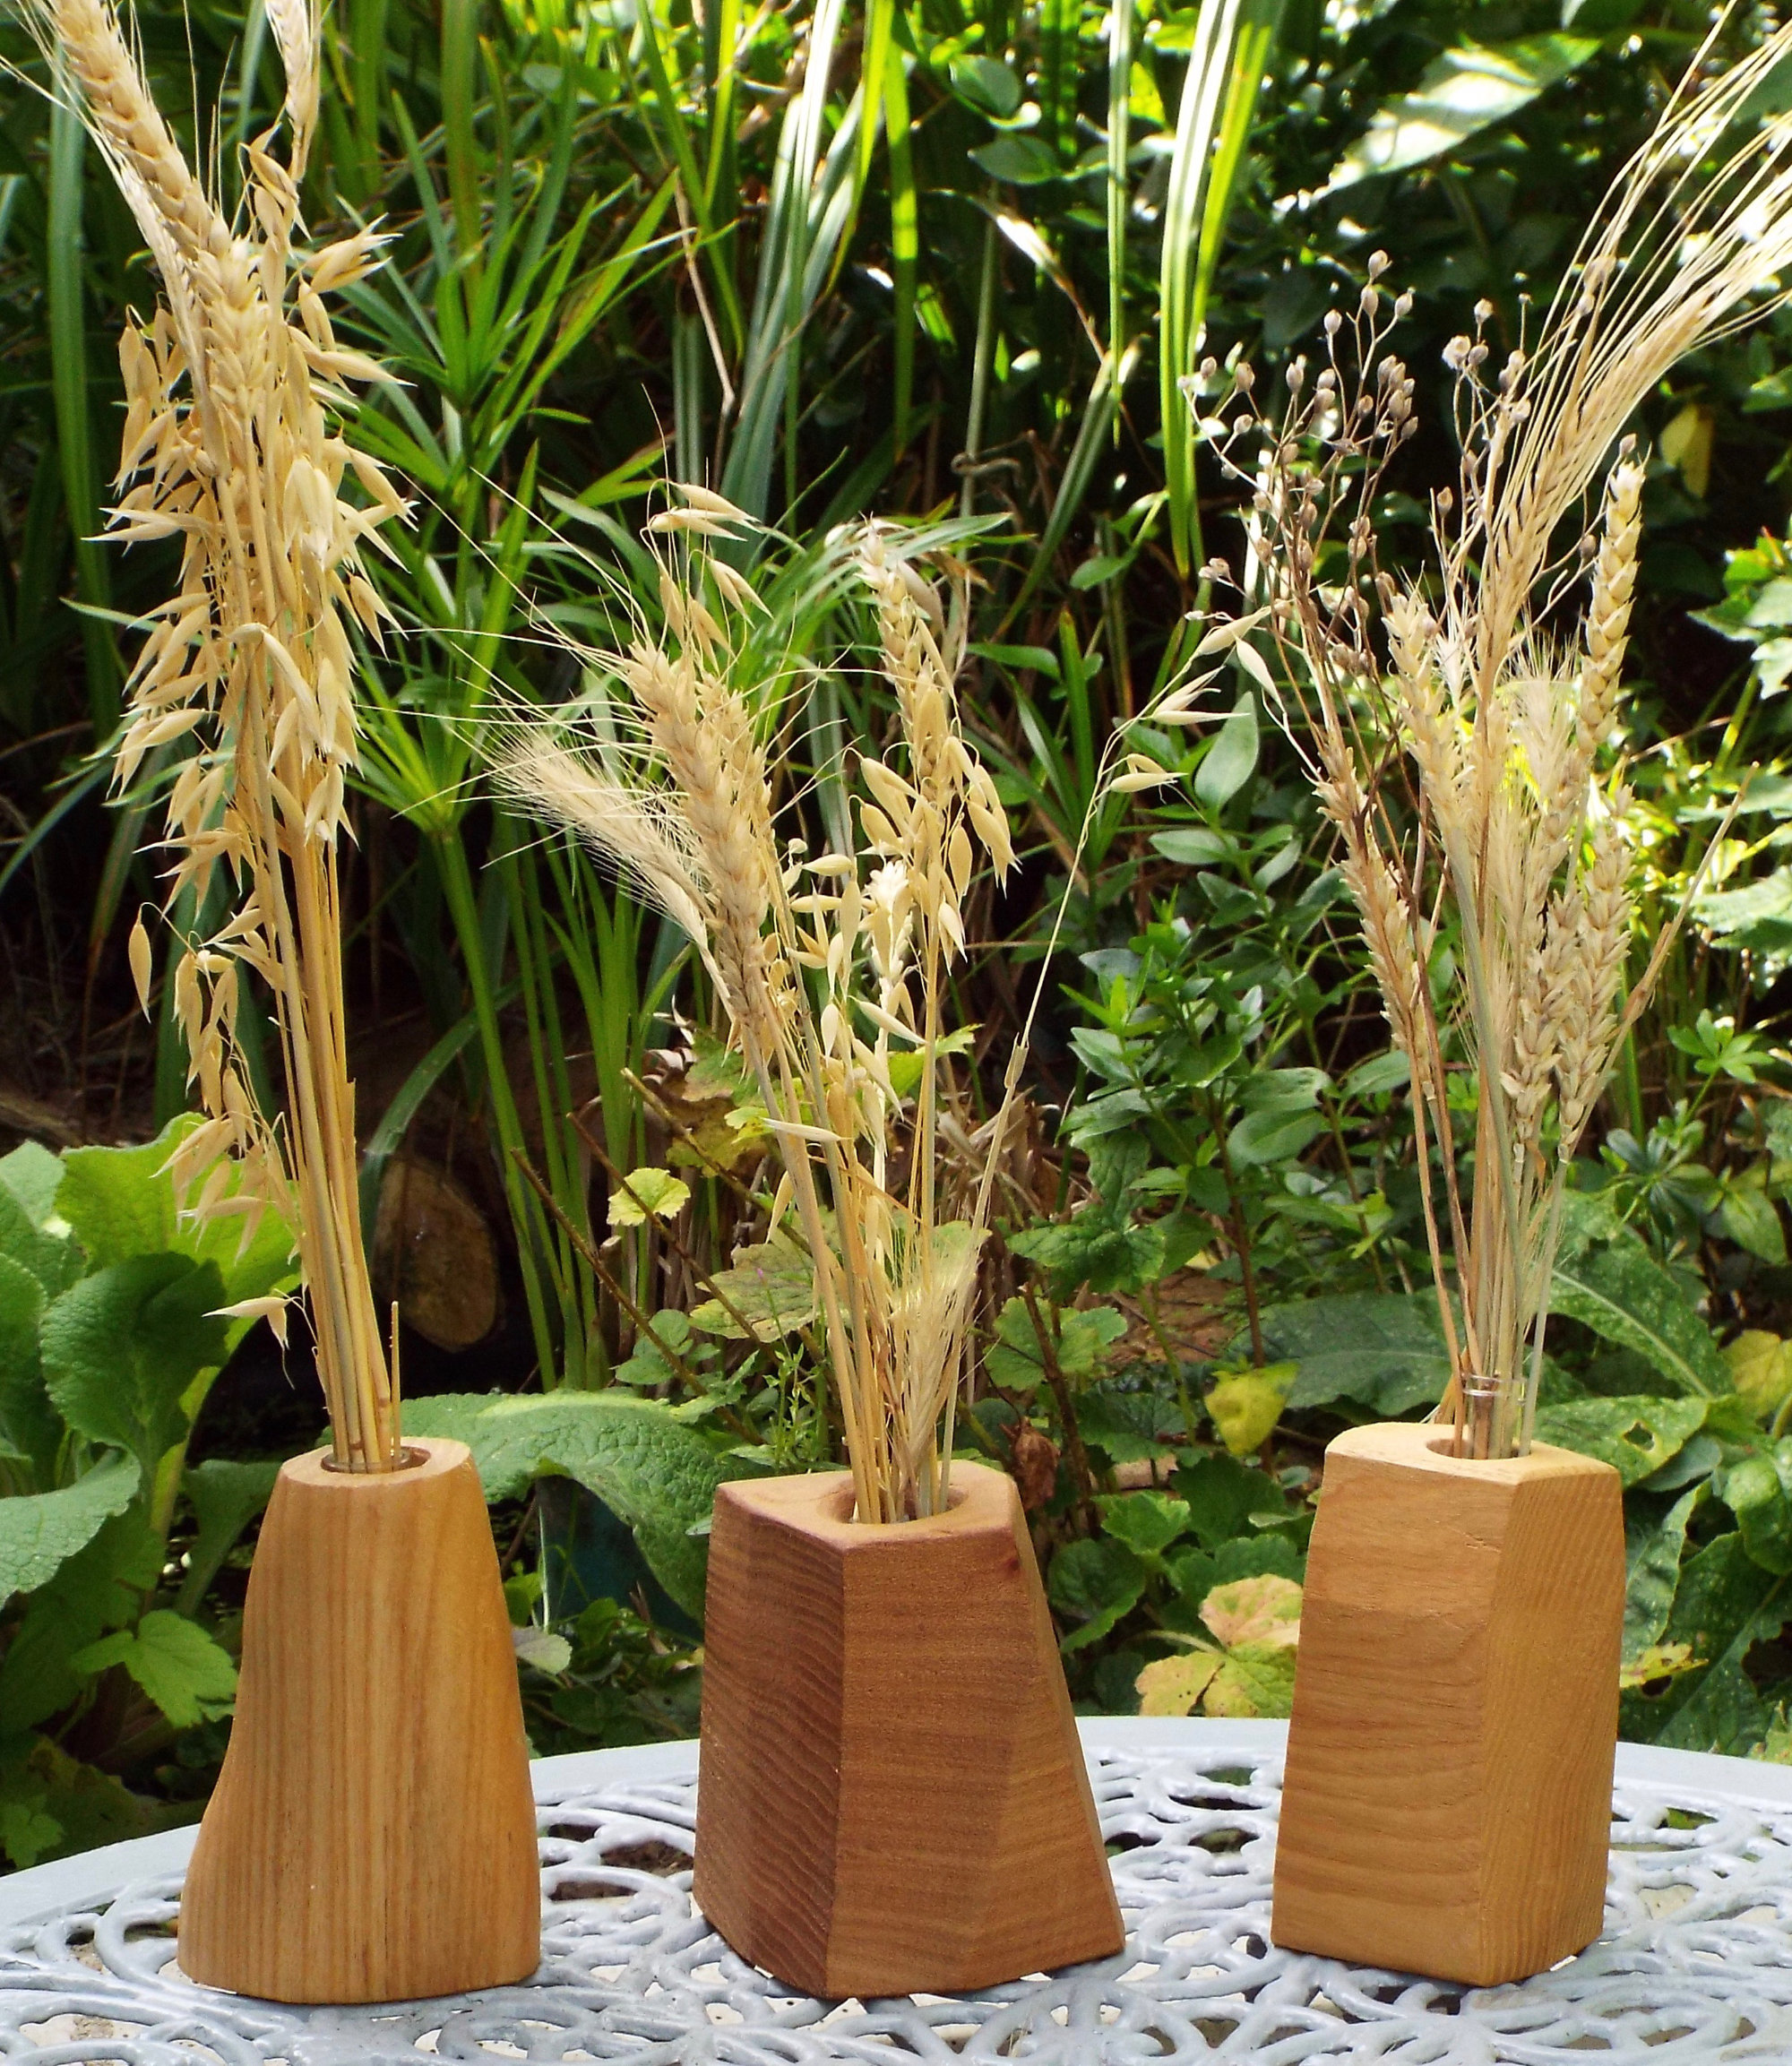 Wooden bud vases by Richard Woodgate.